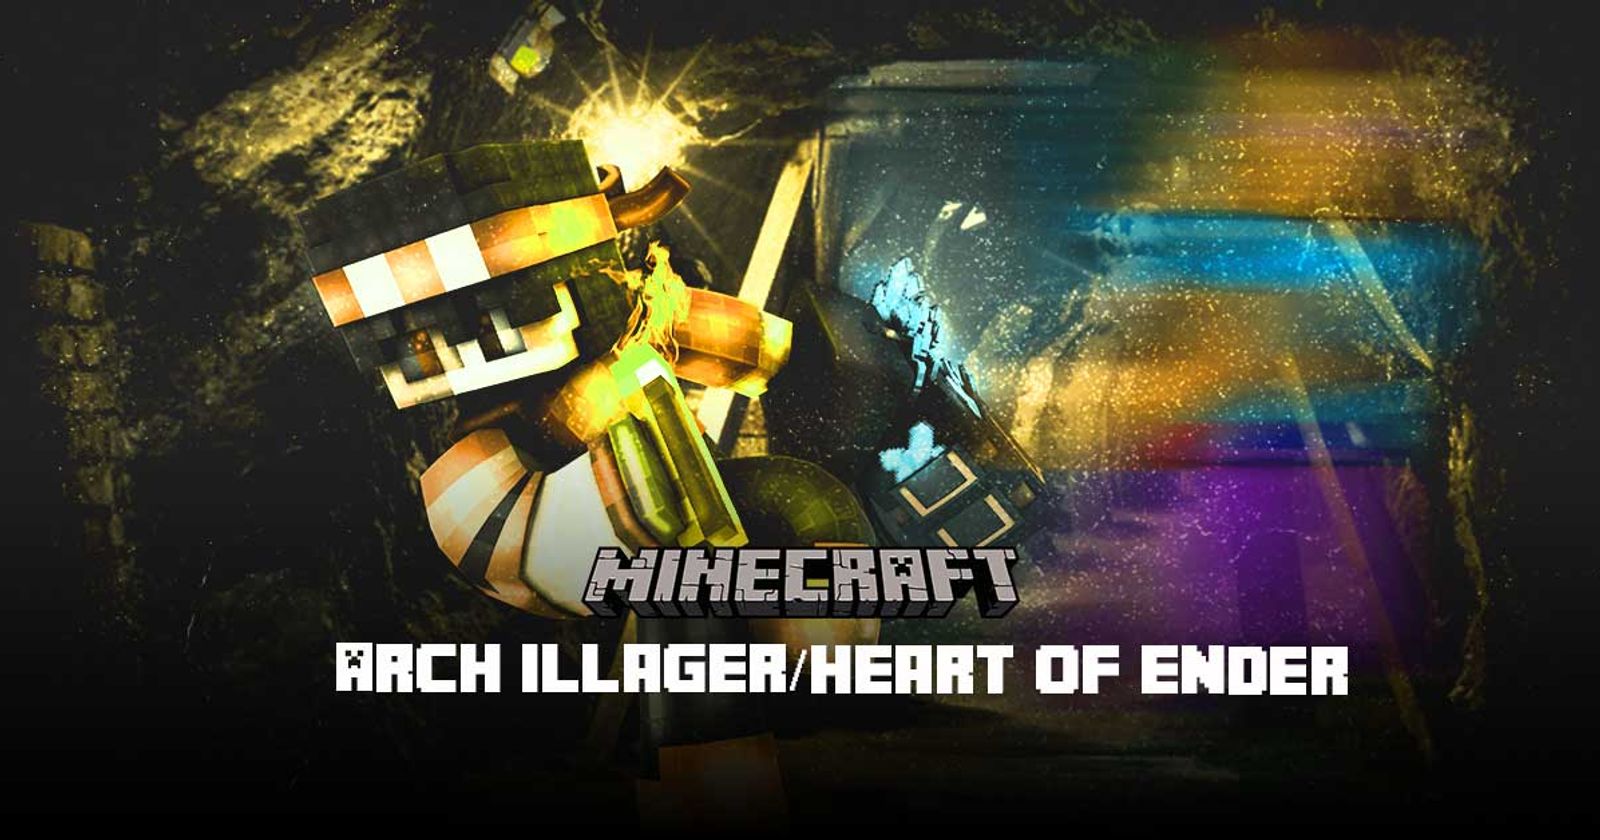 Arch-Illager, Heart of Ender, Vengeful Heart of Ender (Minecraft